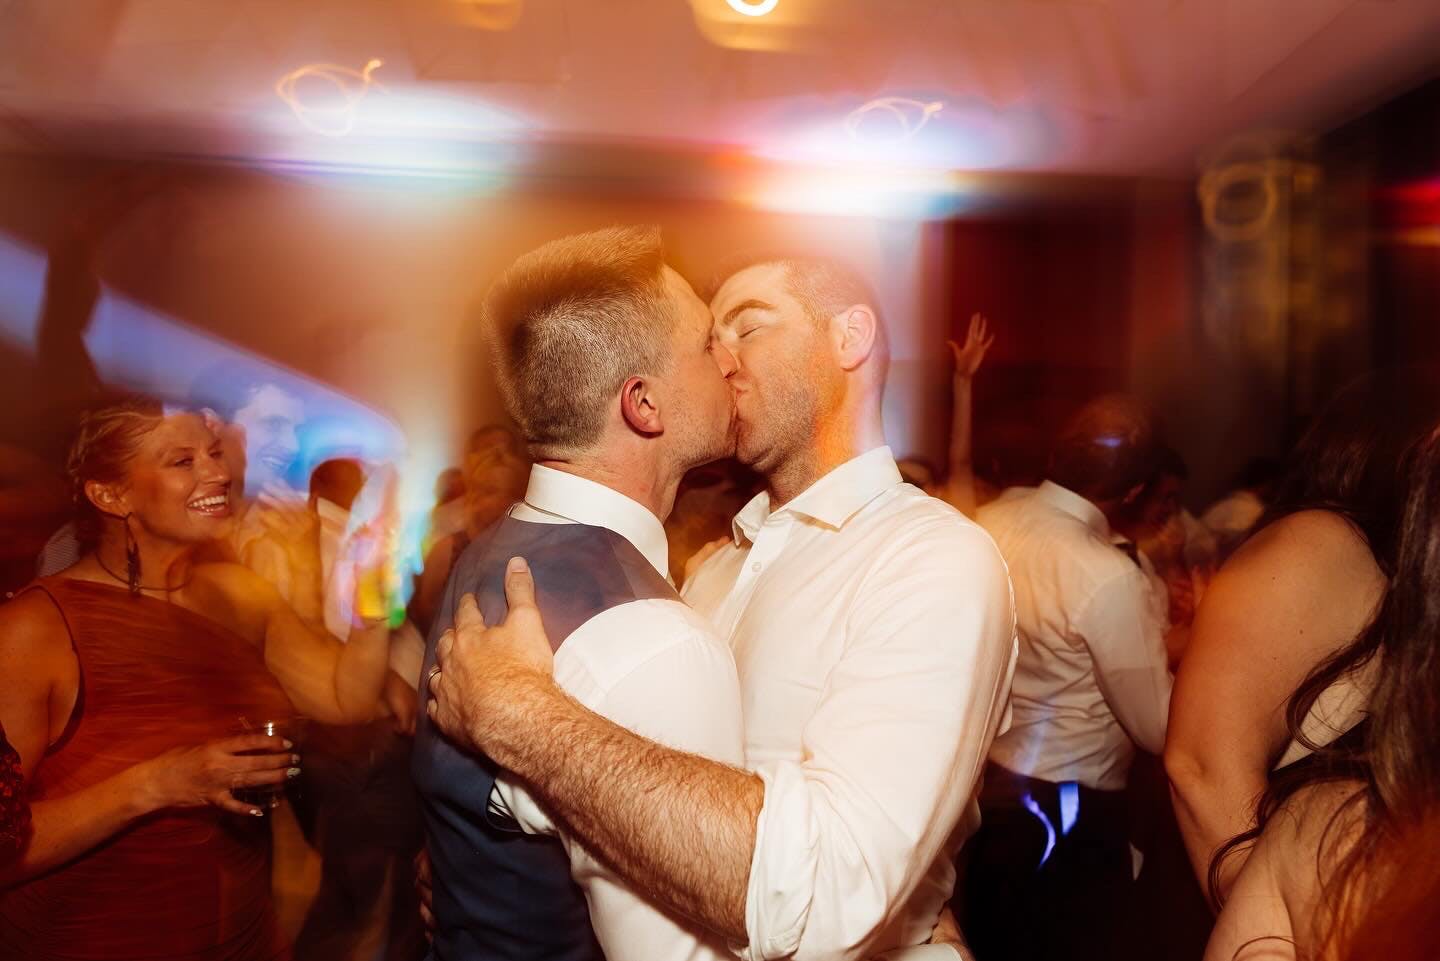 Two grooms embrace and kiss on the dance floor while guests smile and cheer around them